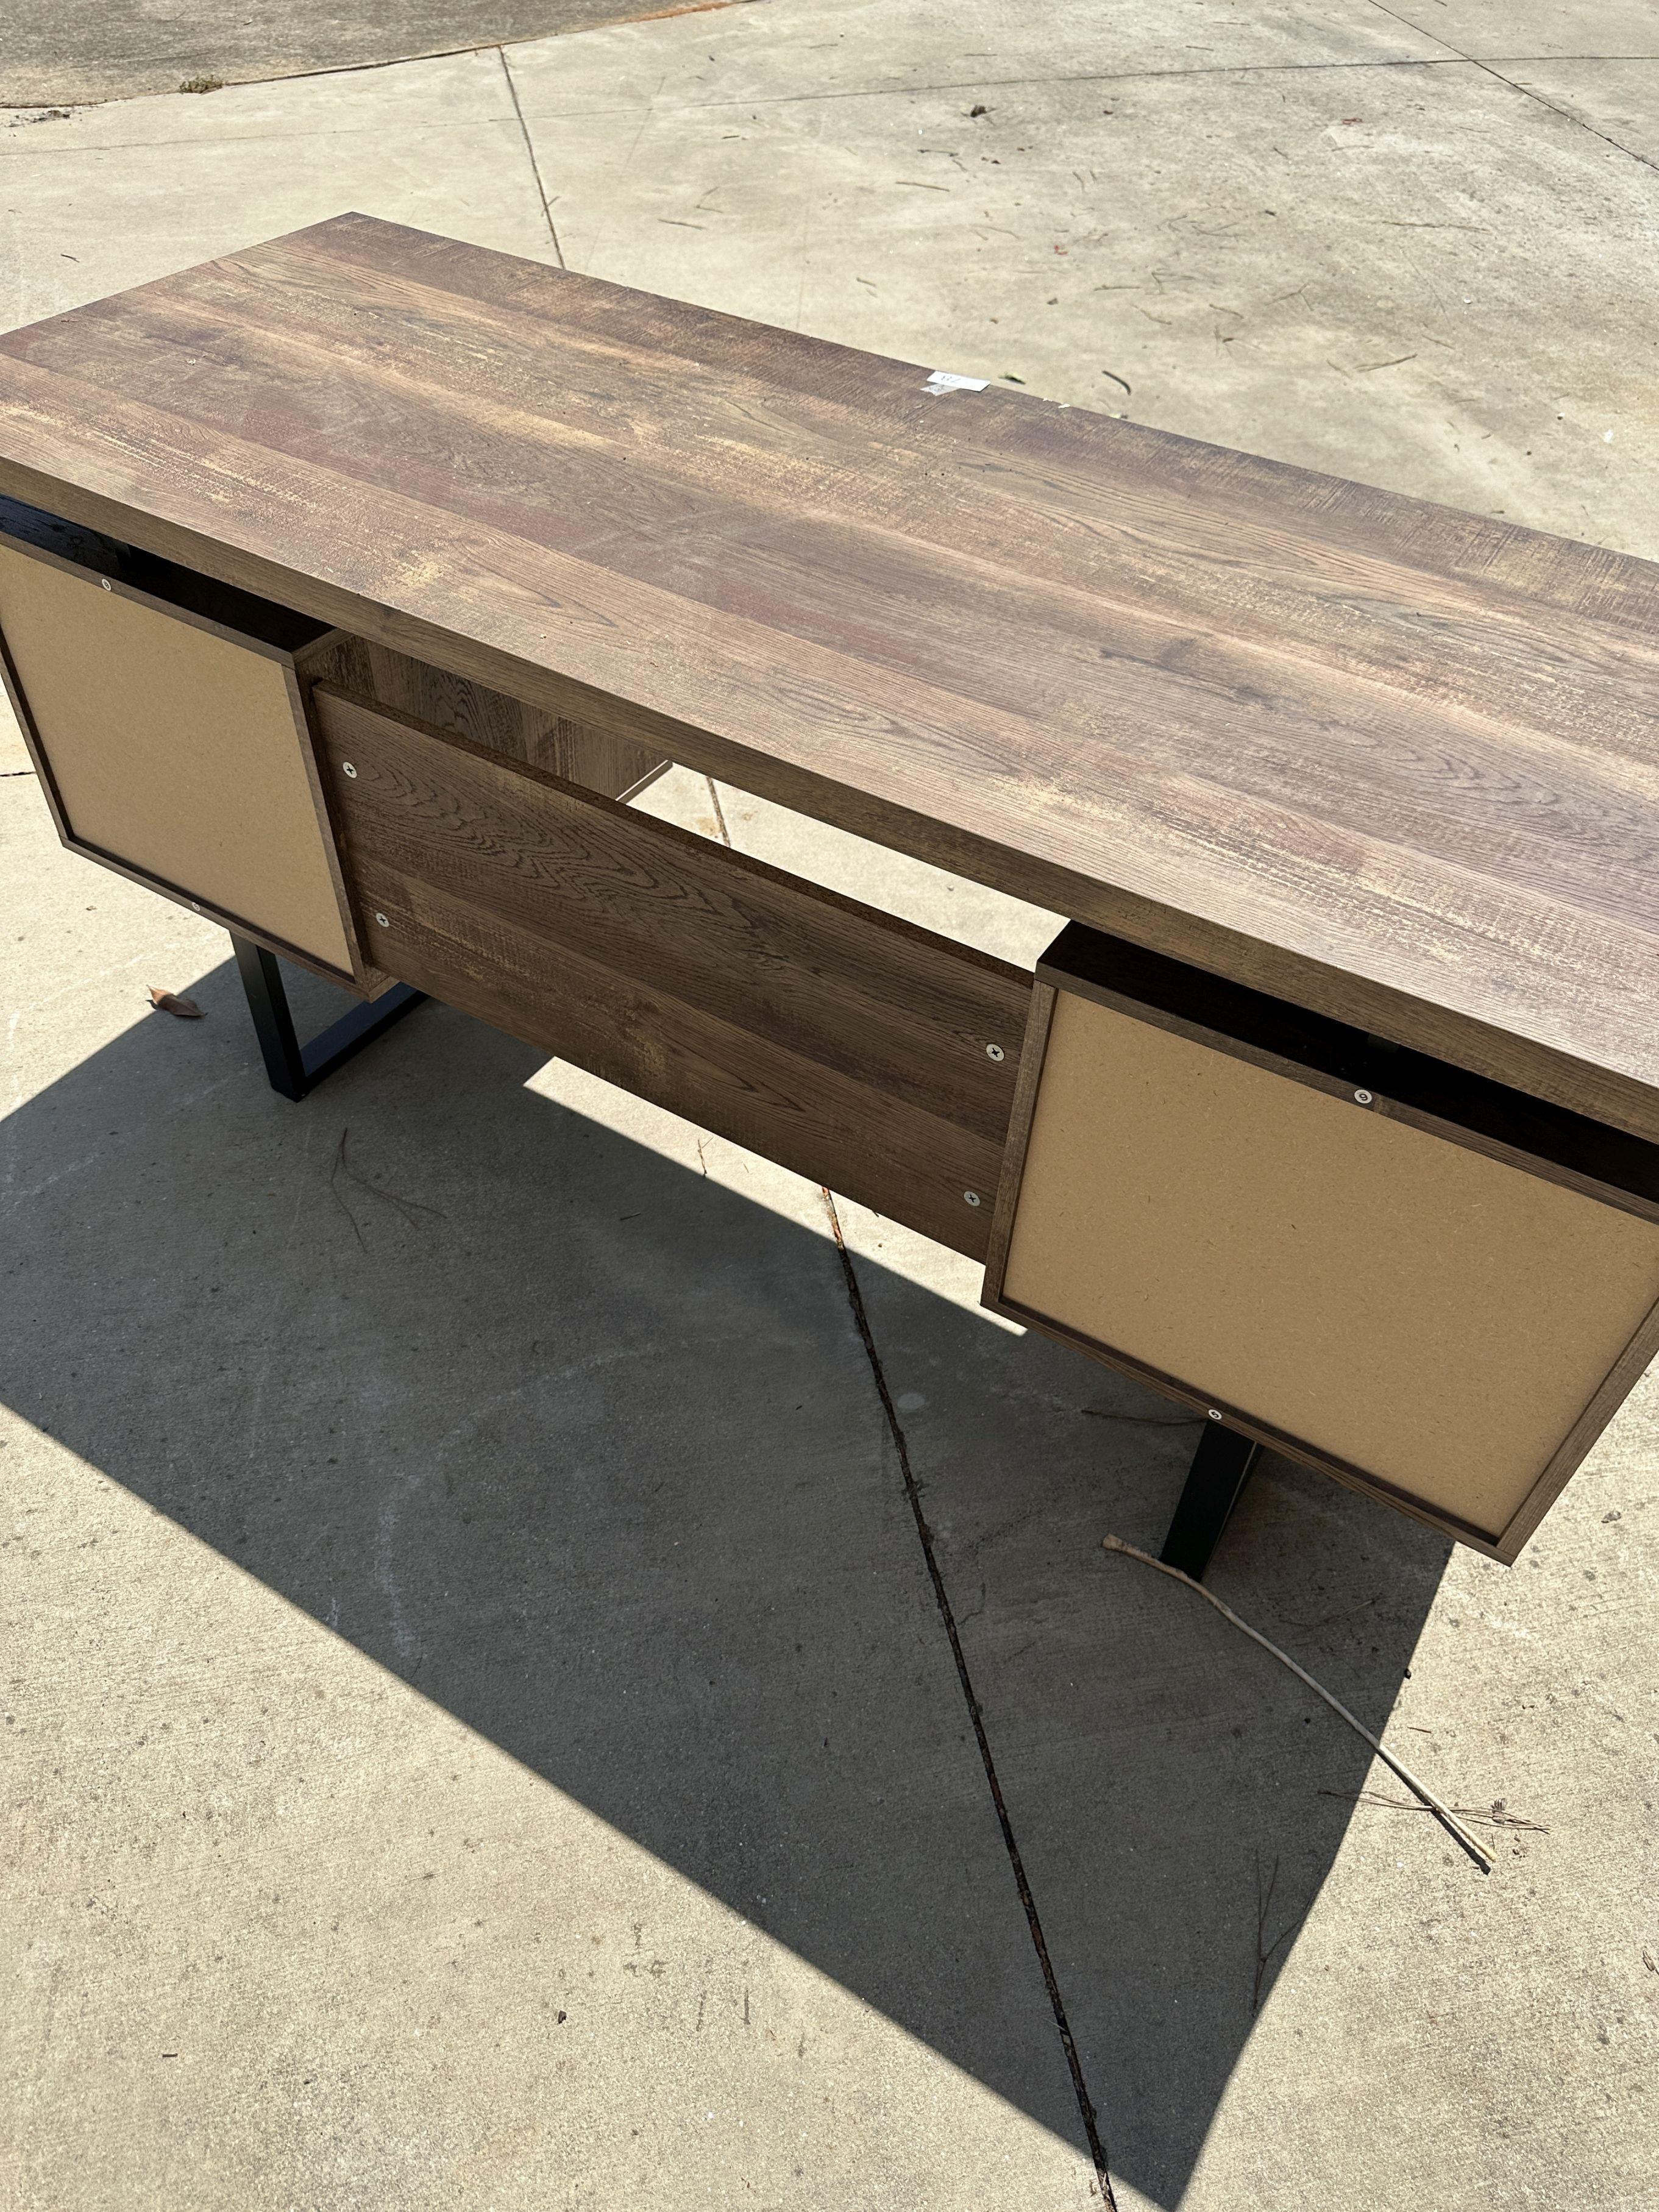 Large Wooden 3 Drawer Desk (Local Pick Up Only)